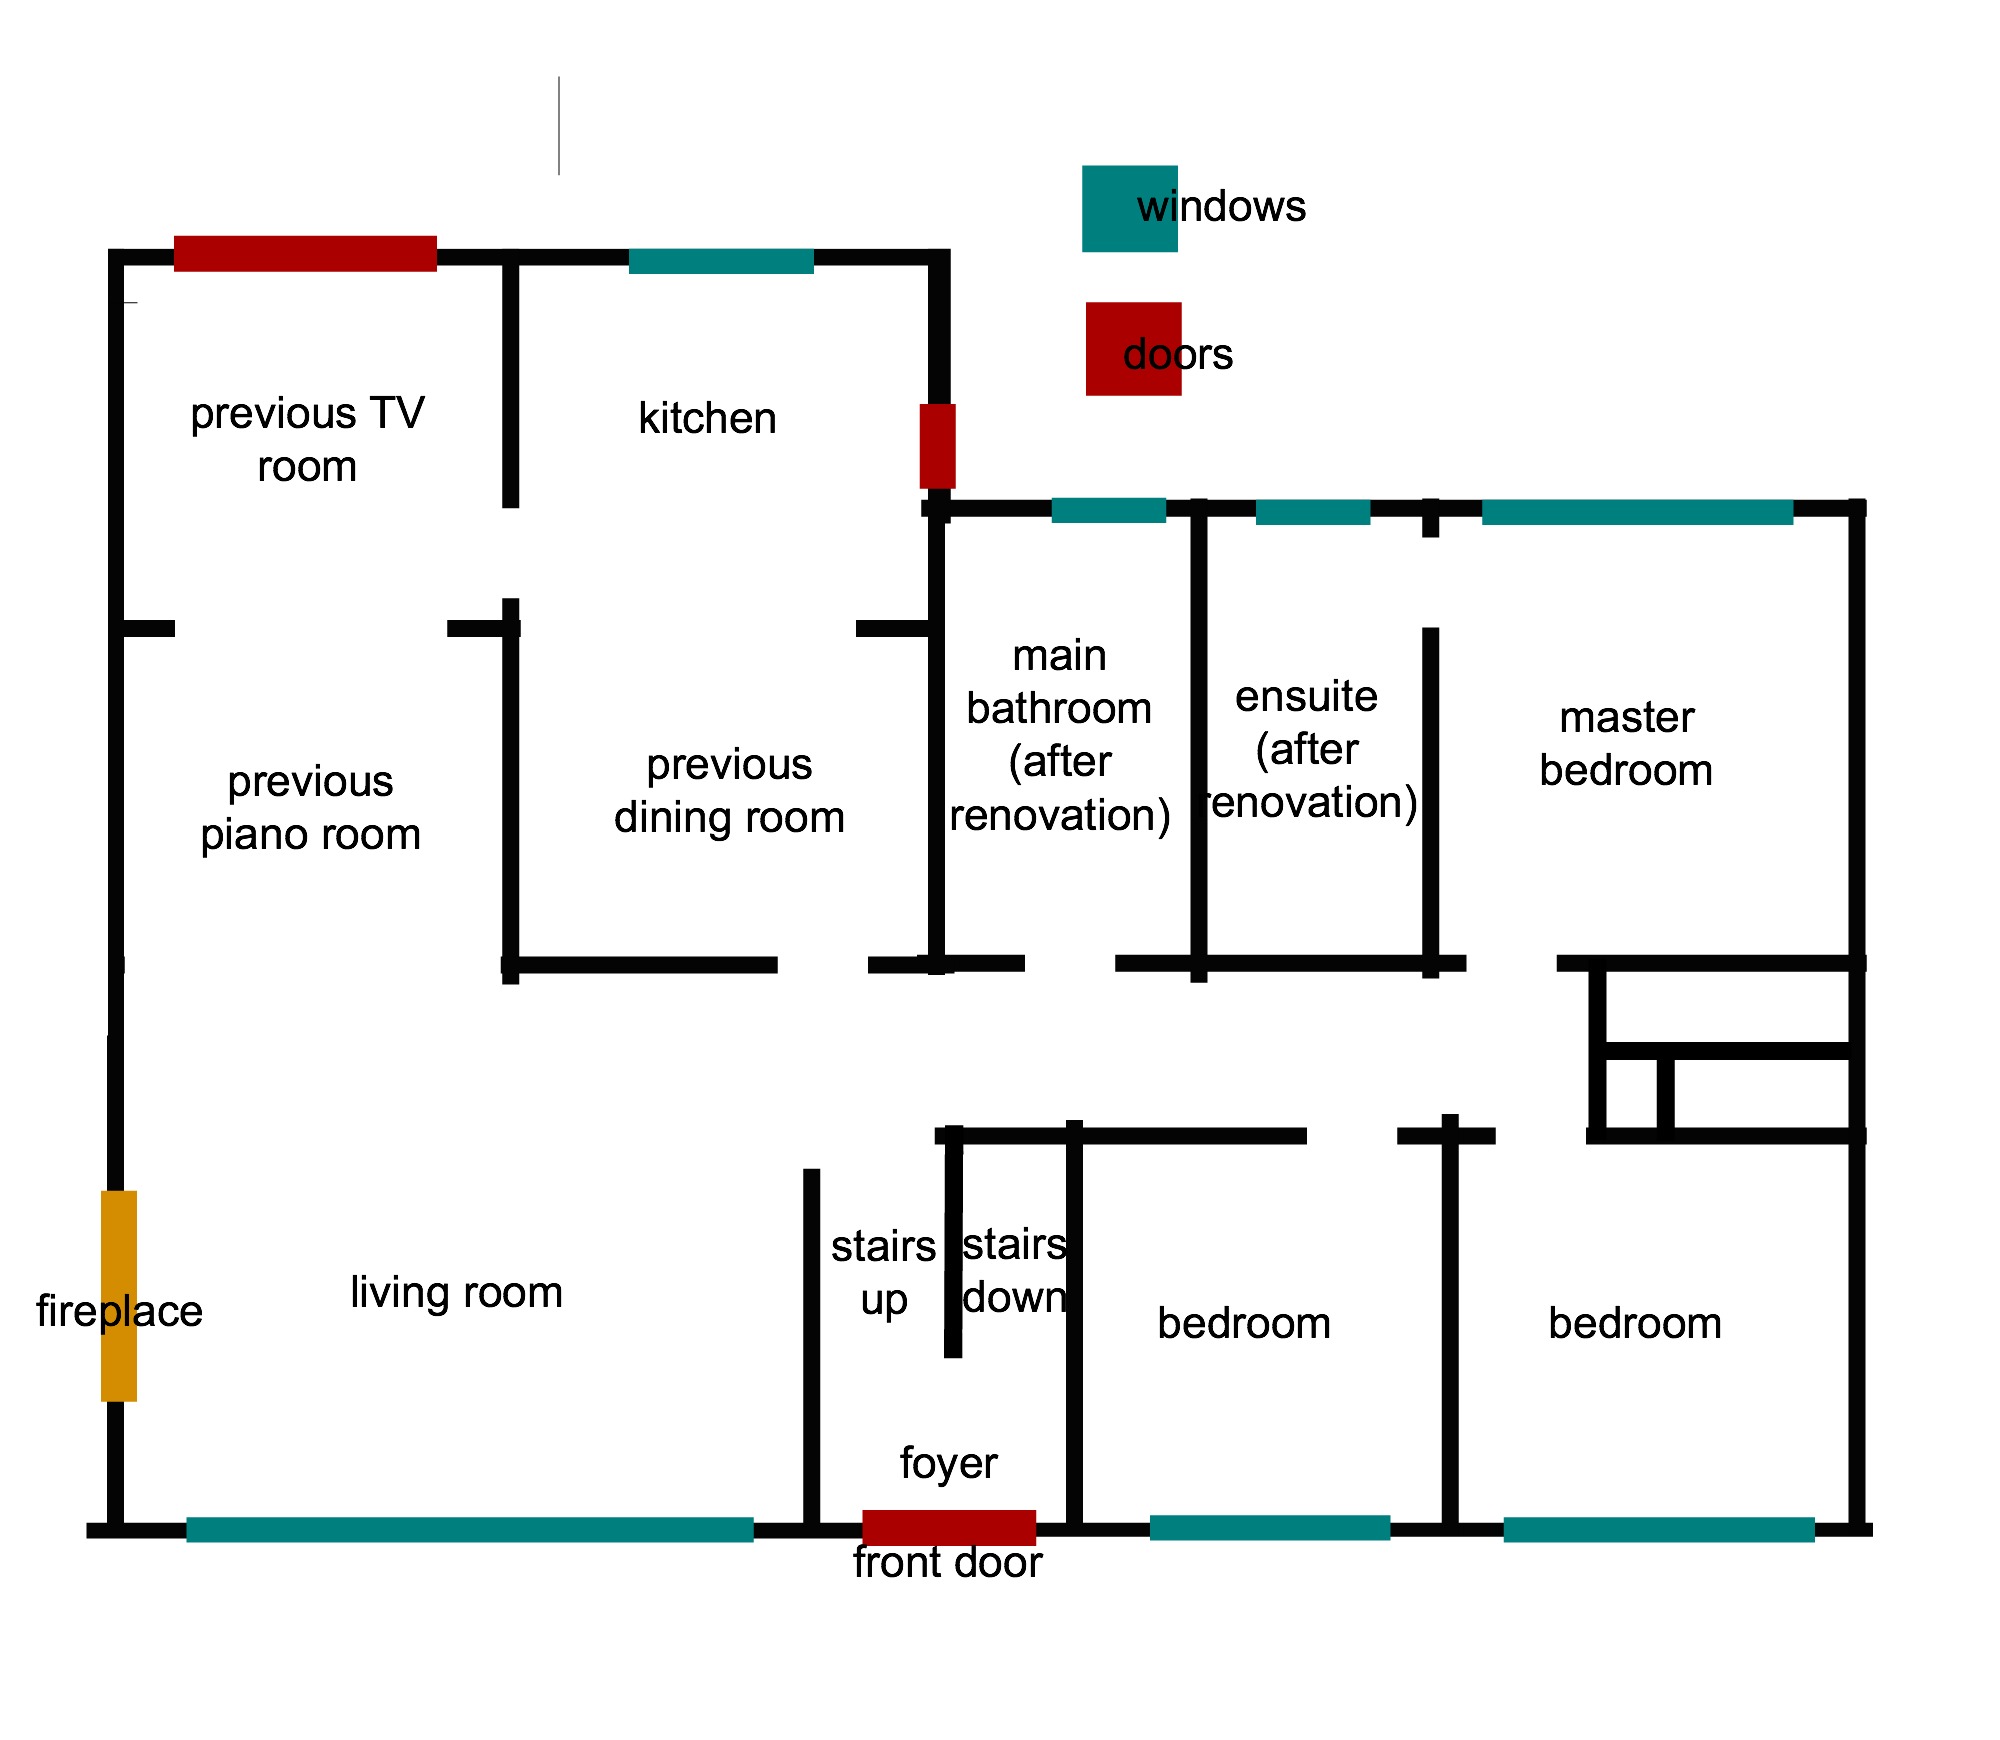 Floor plan for a house being renovated.